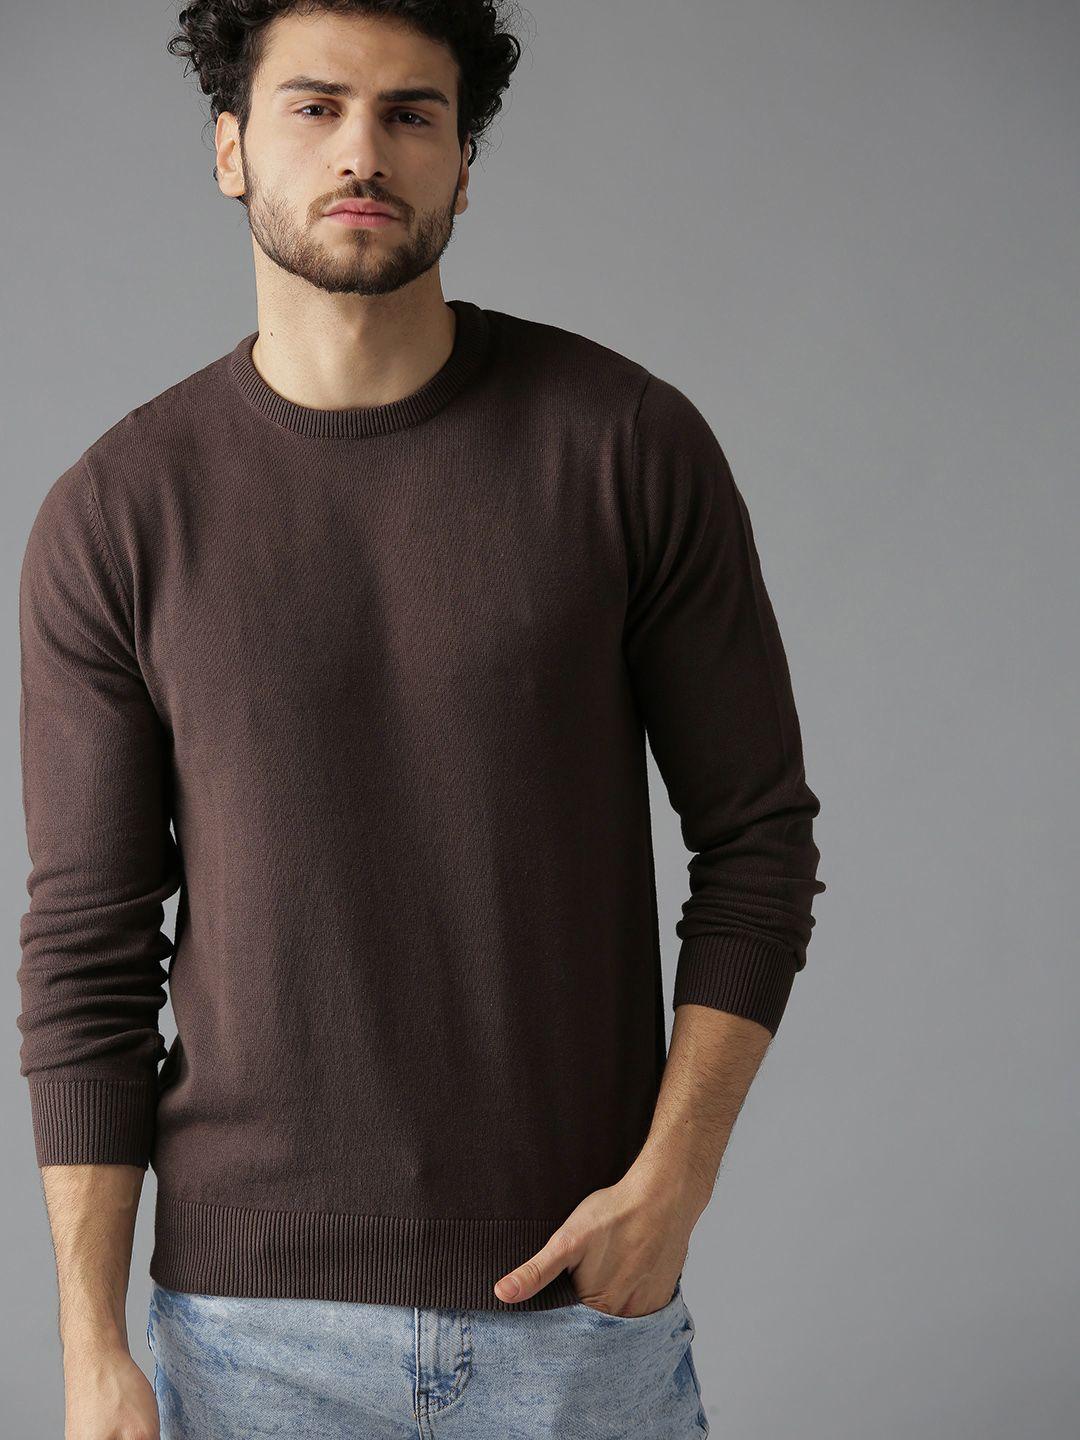 the roadster lifestyle co men coffee brown solid sweater